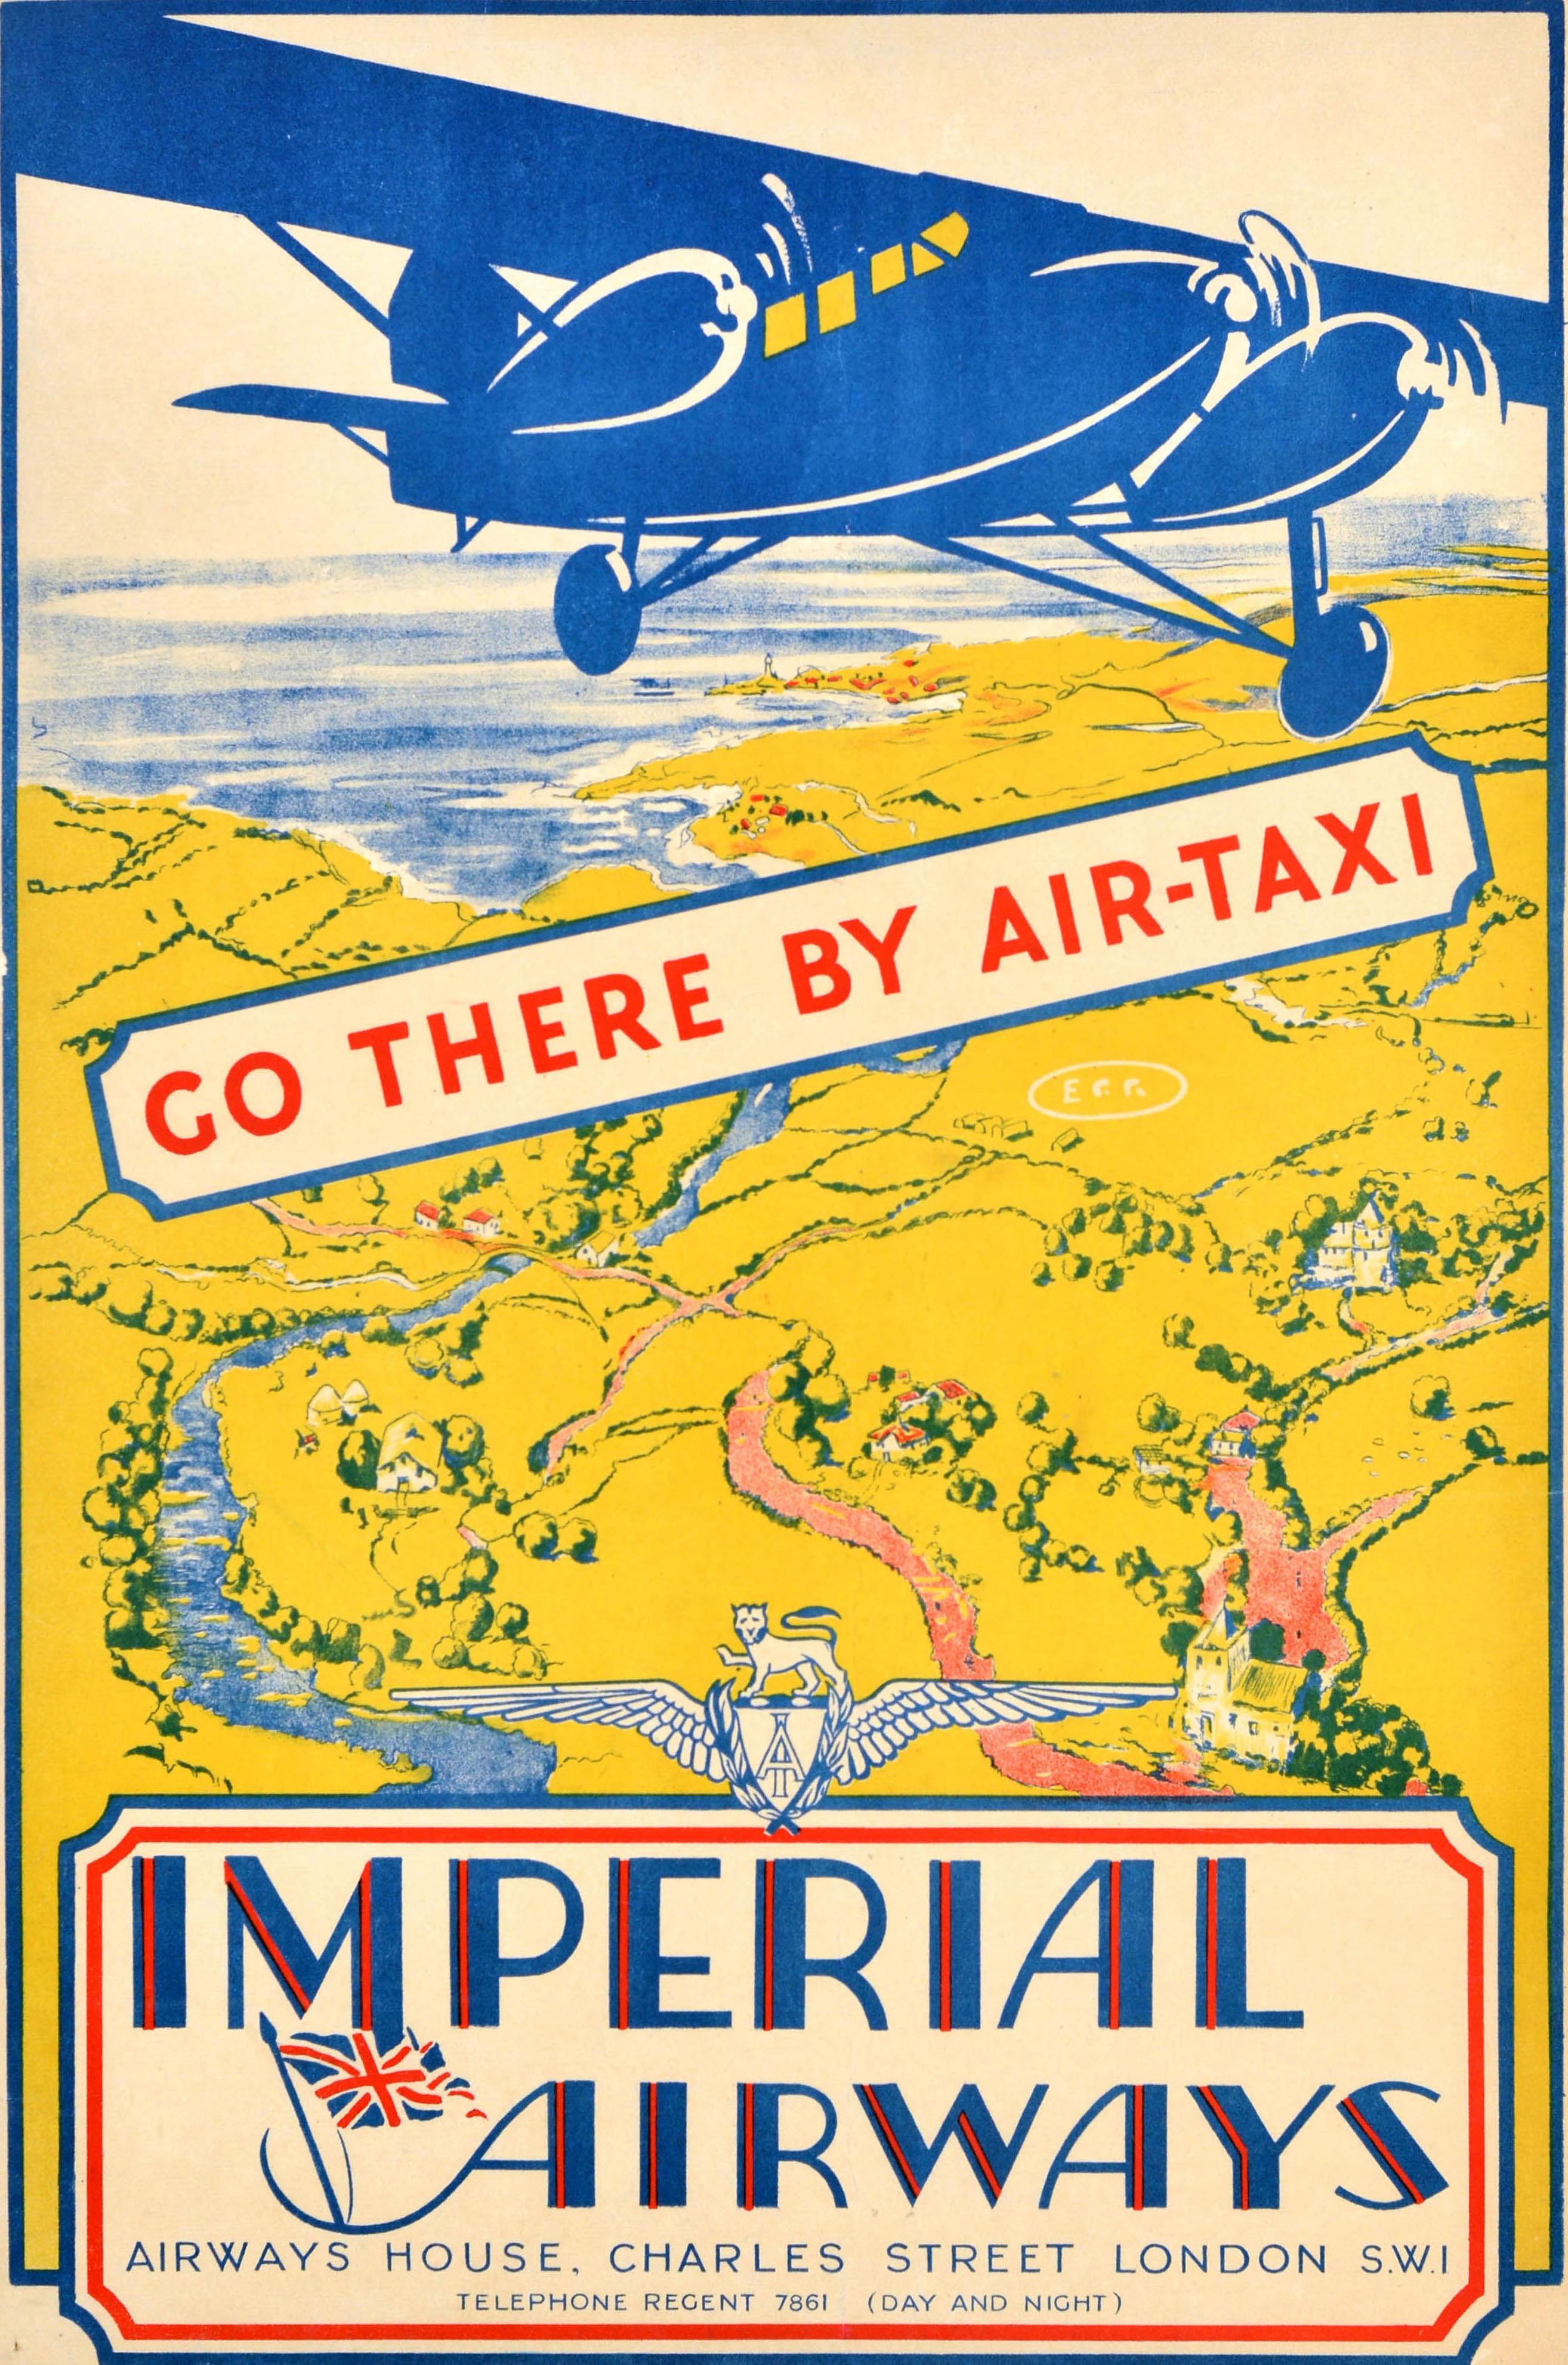 Original vintage travel advertising poster for Imperial Airways Go There By Air-Taxi featuring a great illustration of a propeller plane in blue flying over a river runnign between fields and buildings in the countryside below, the sea along the